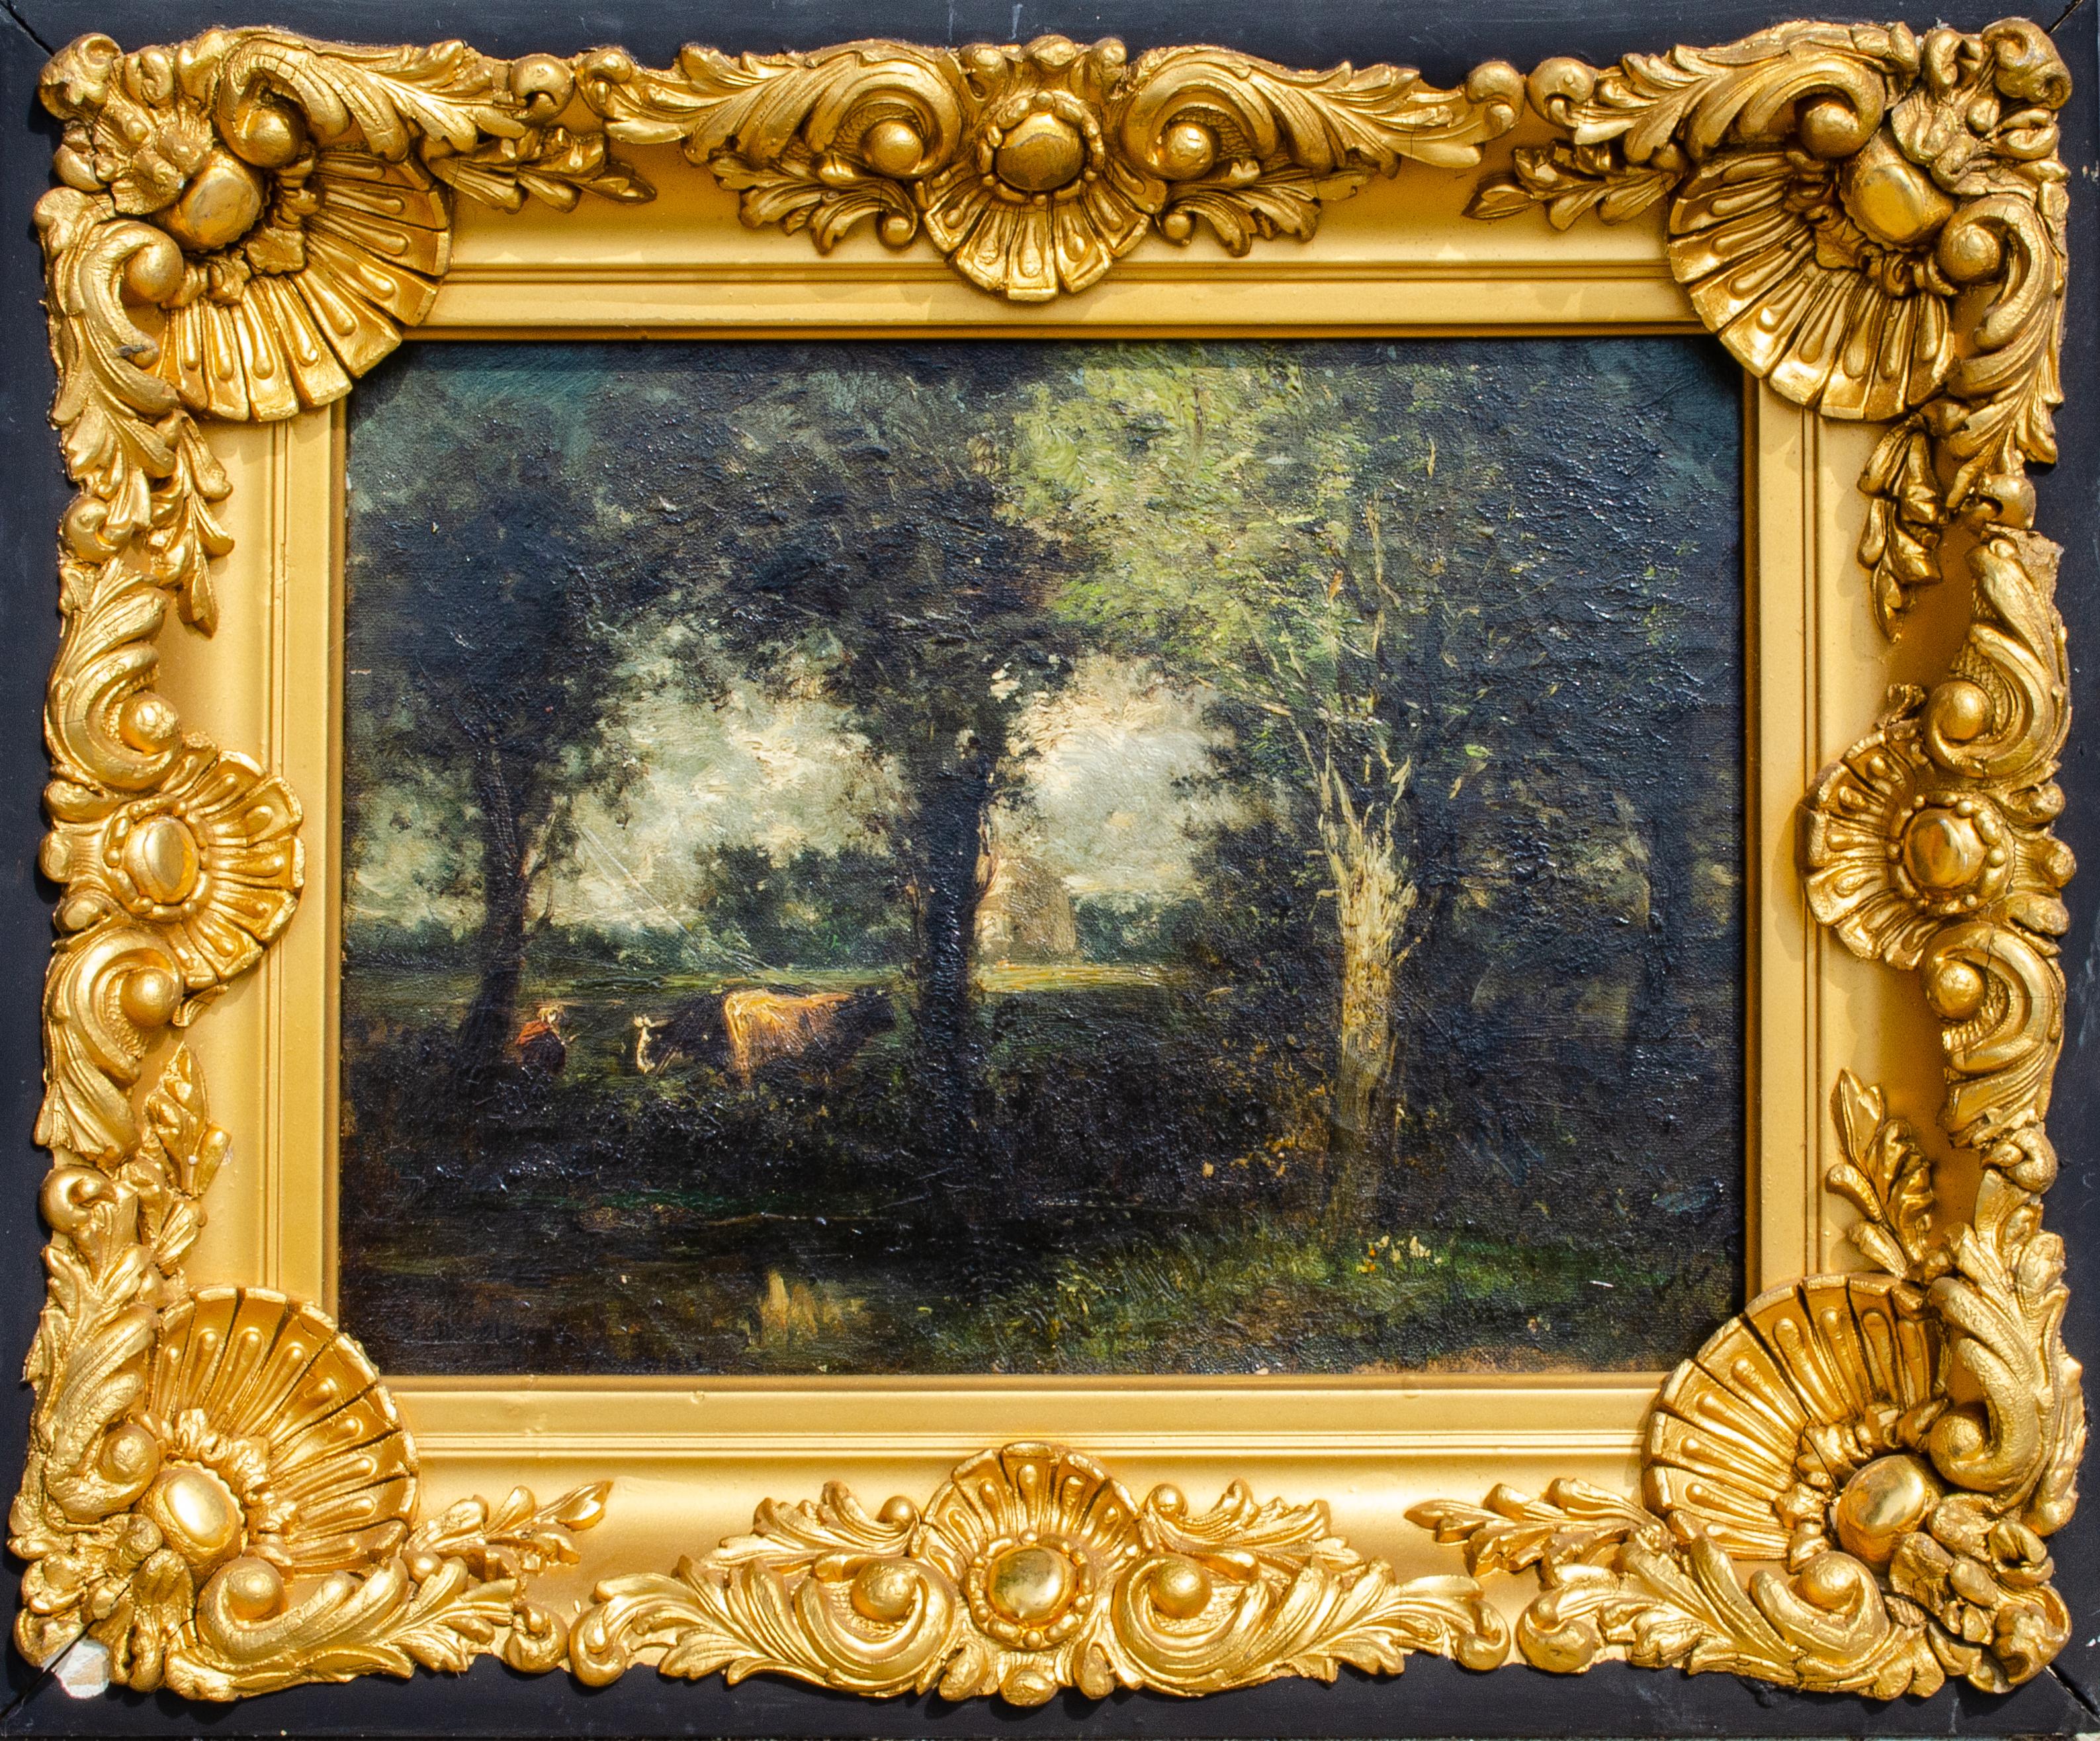 Charles Henry Miller Landscape Painting - Style of Troyon Impressionist Painting by C.H. Miller